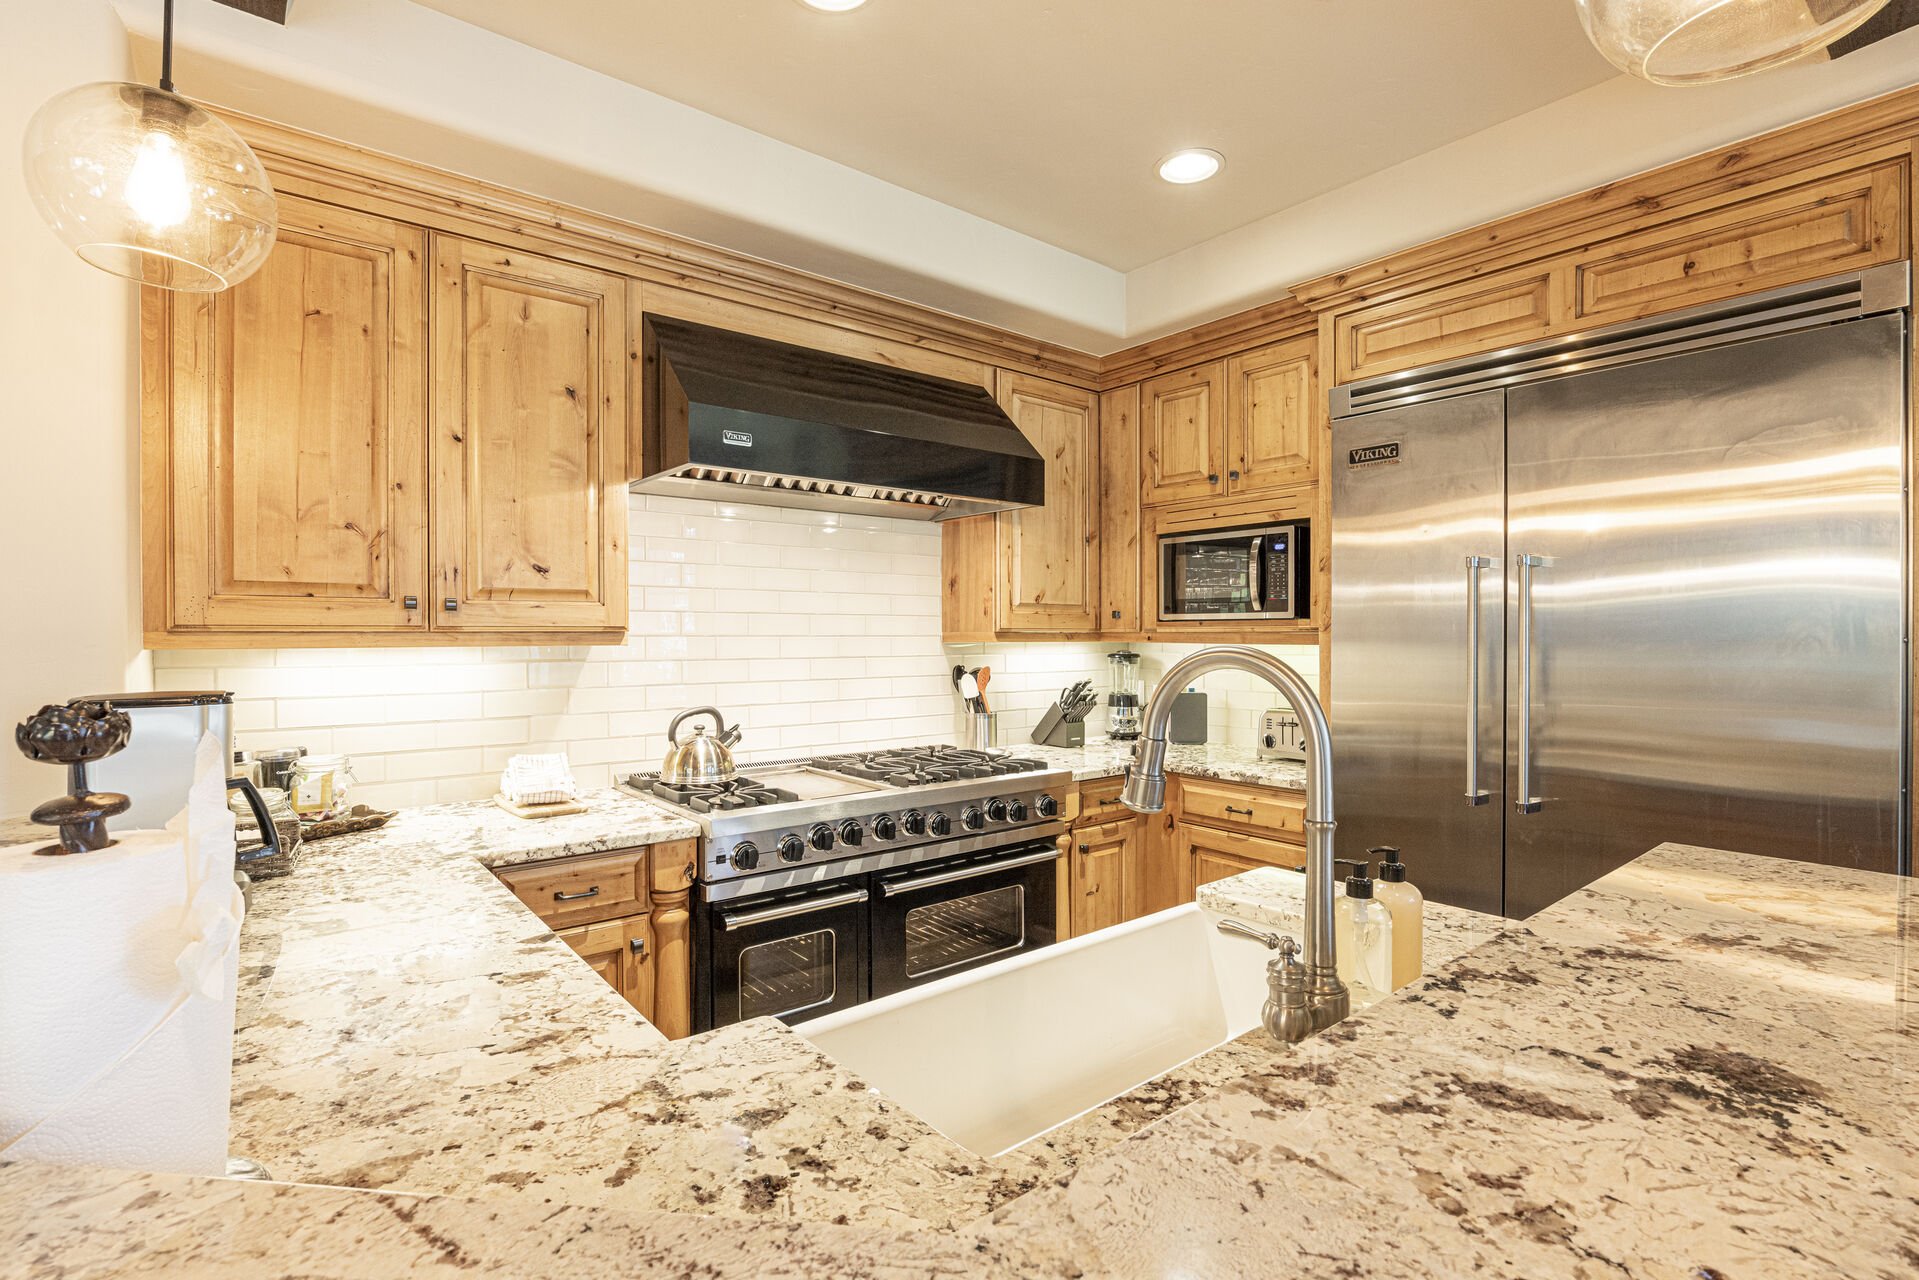 Gourmet Kitchen with Viking Appliances, Including a 6-Burner Gas Range with a Griddle and Double Ovens